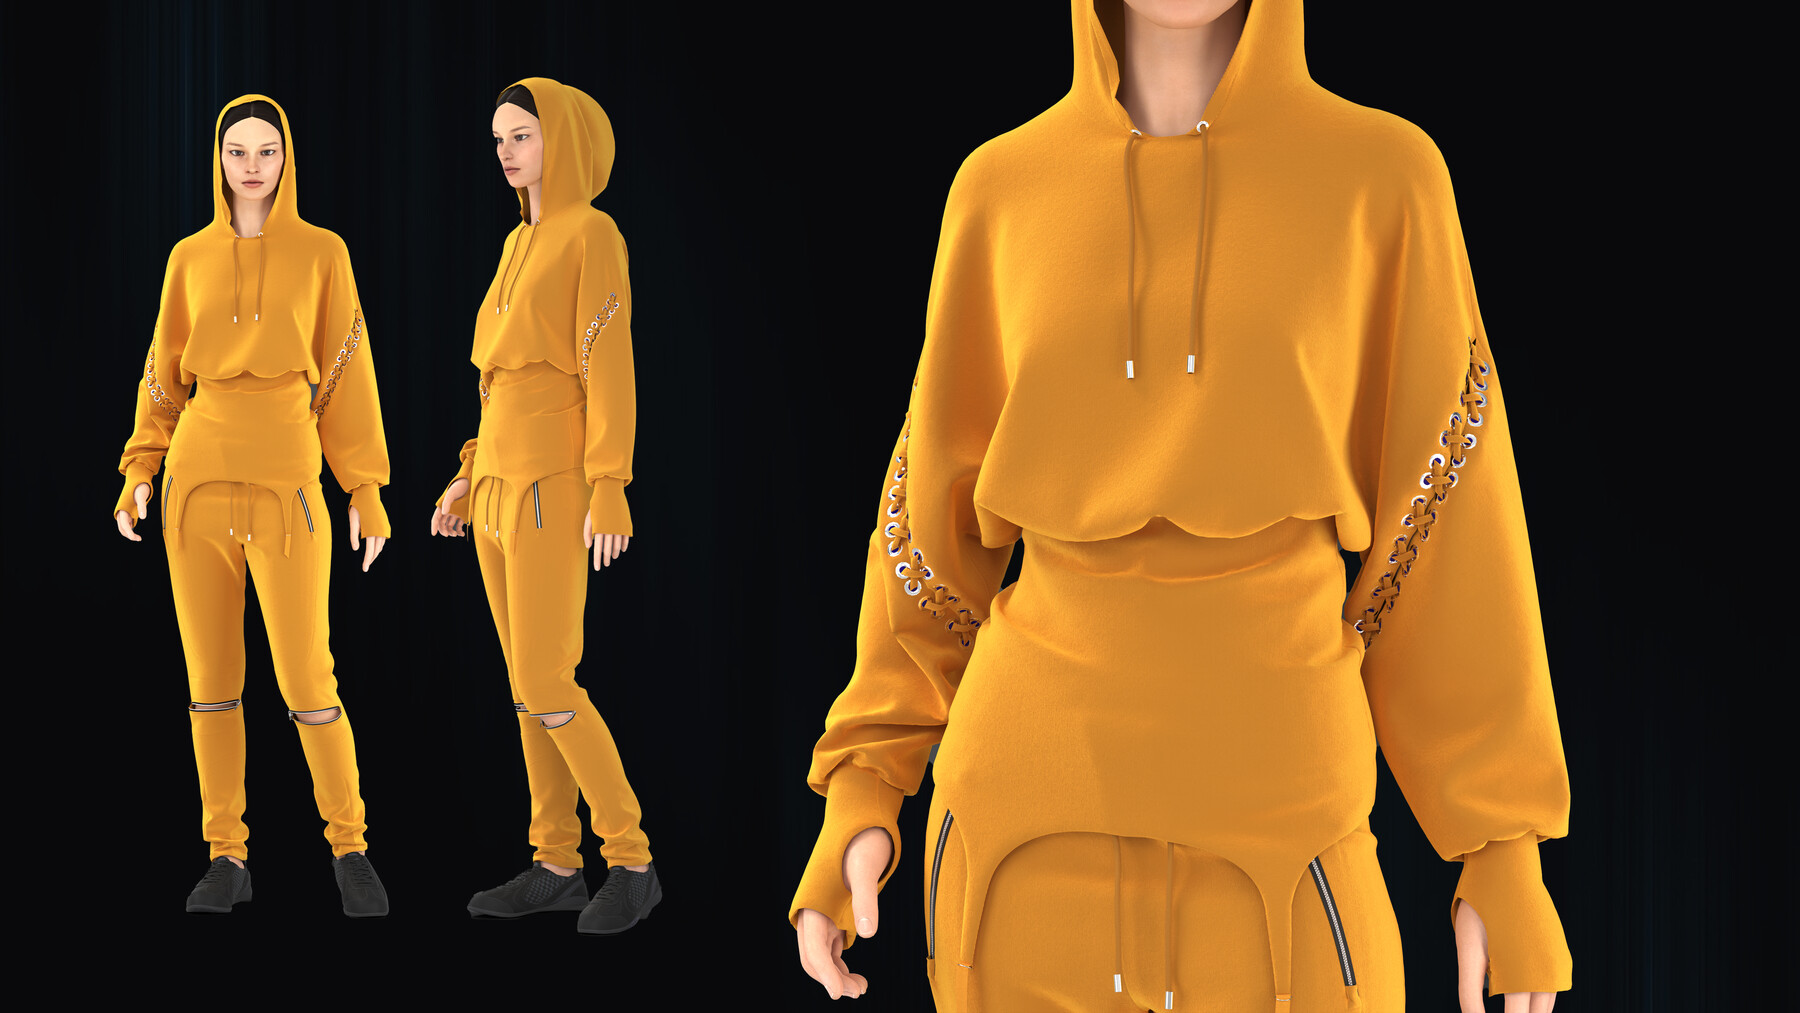 ArtStation - Yellow girls outfit | Game Assets